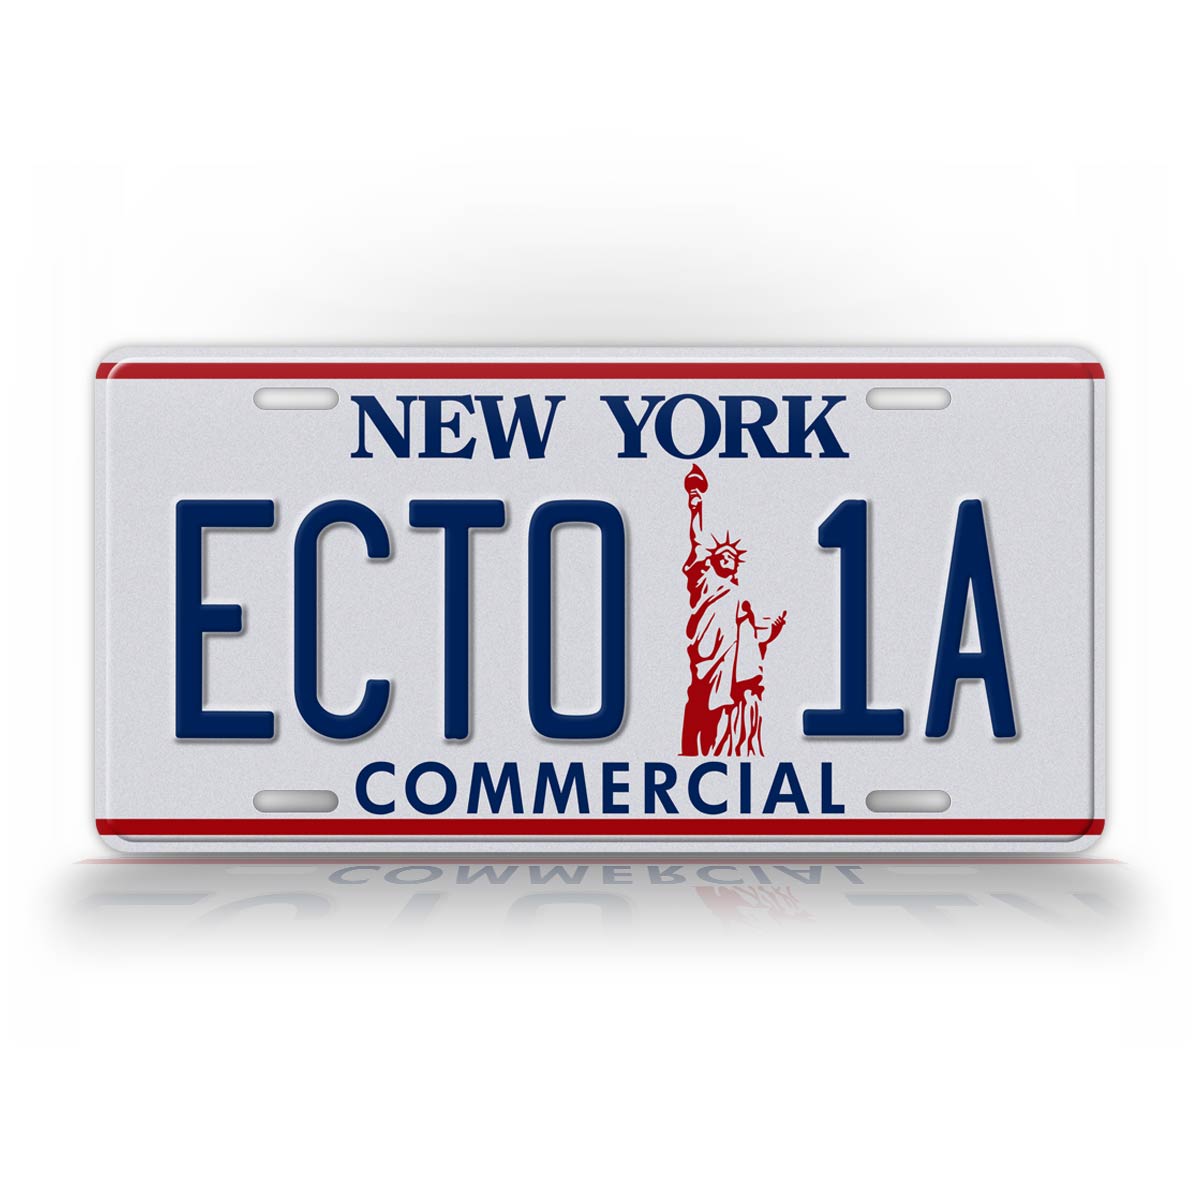 Ghost Busters II New York License Plate Ecto-1 Movie Prop